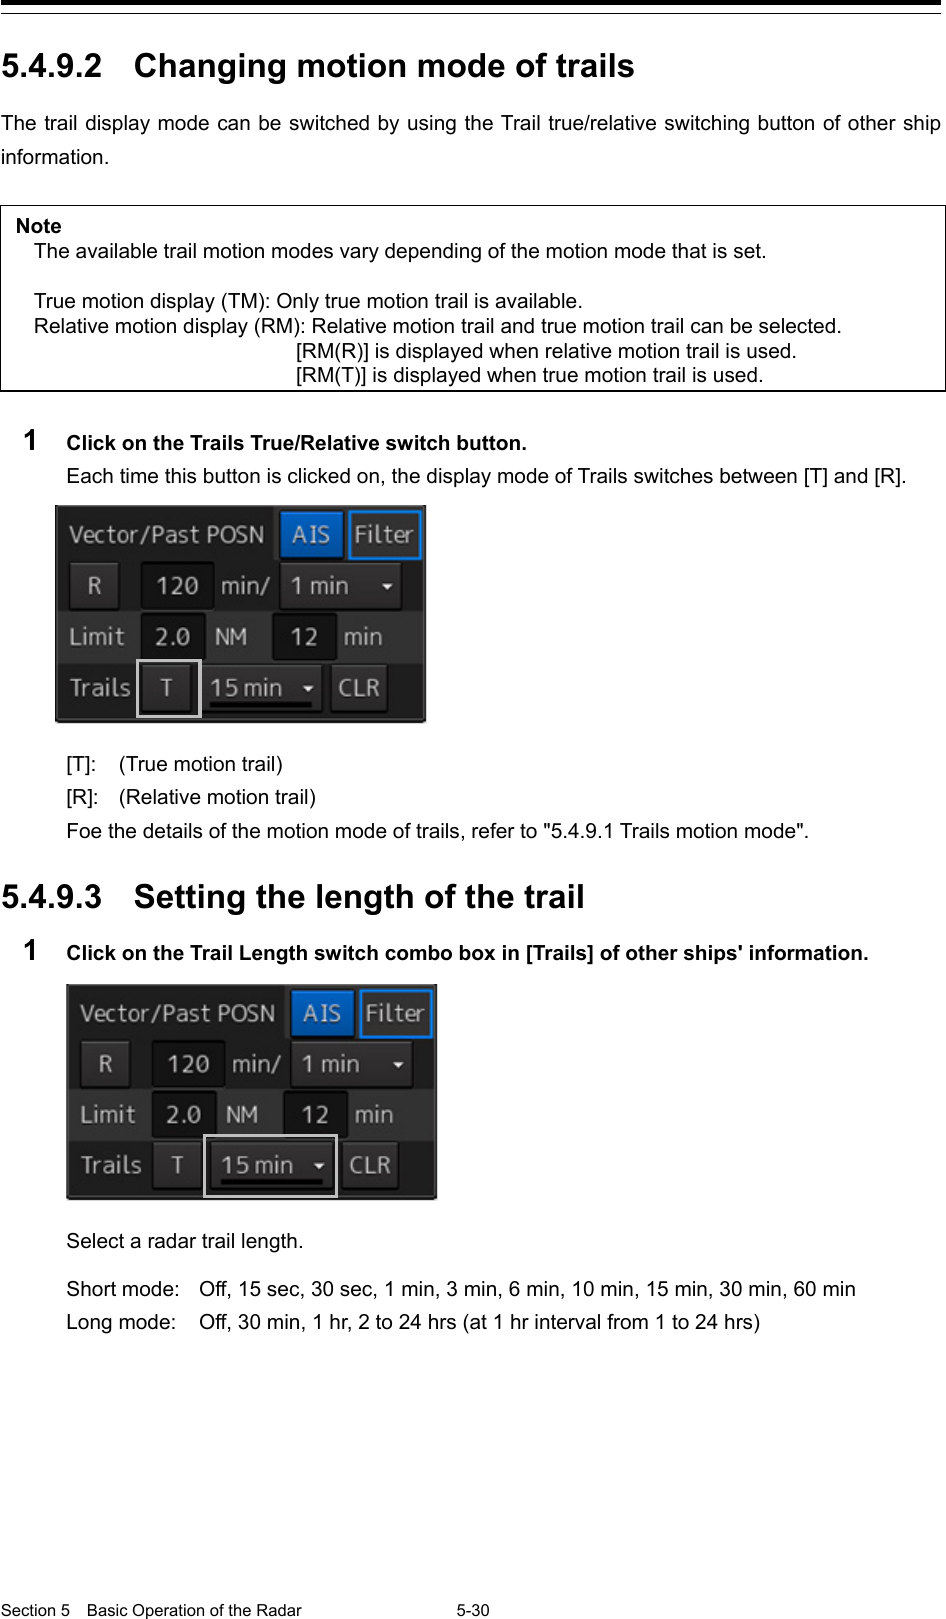  Section 5  Basic Operation of the Radar 5-30  5.4.9.2  Changing motion mode of trails The trail display mode can be switched by using the Trail true/relative switching button of other ship information.  Note The available trail motion modes vary depending of the motion mode that is set.  True motion display (TM): Only true motion trail is available. Relative motion display (RM): Relative motion trail and true motion trail can be selected.  [RM(R)] is displayed when relative motion trail is used.  [RM(T)] is displayed when true motion trail is used.  1  Click on the Trails True/Relative switch button. Each time this button is clicked on, the display mode of Trails switches between [T] and [R].    [T]:  (True motion trail) [R]:  (Relative motion trail) Foe the details of the motion mode of trails, refer to &quot;5.4.9.1 Trails motion mode&quot;.  5.4.9.3  Setting the length of the trail 1  Click on the Trail Length switch combo box in [Trails] of other ships&apos; information.    Select a radar trail length.  Short mode:   Off, 15 sec, 30 sec, 1 min, 3 min, 6 min, 10 min, 15 min, 30 min, 60 min   Long mode:   Off, 30 min, 1 hr, 2 to 24 hrs (at 1 hr interval from 1 to 24 hrs)     